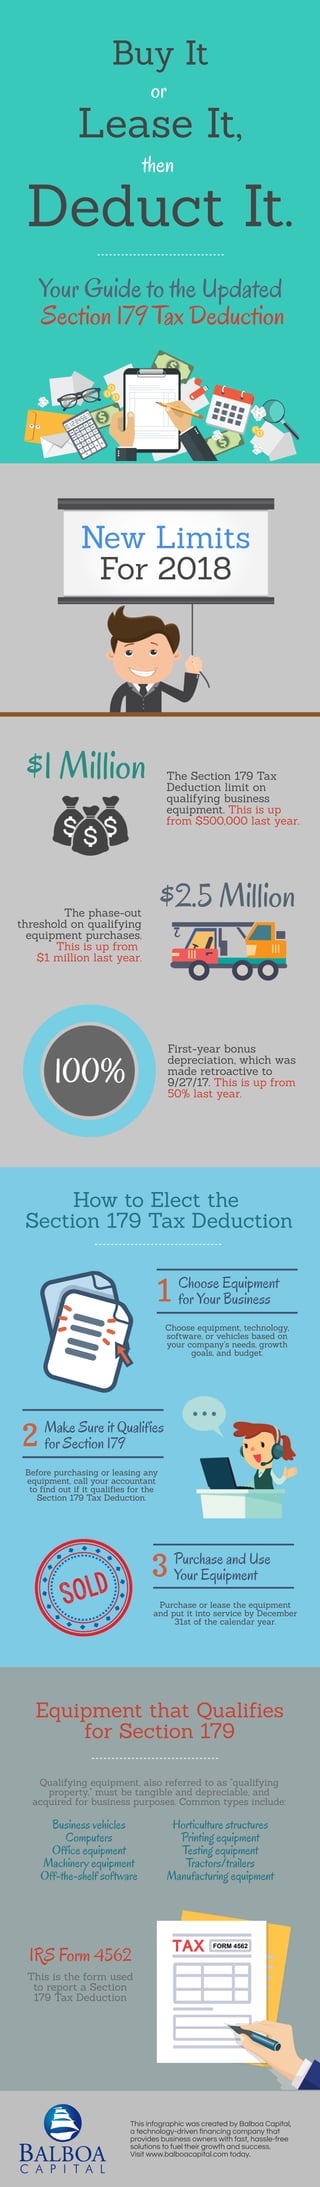 Deduct It.
Buy It
Lease It,
or 
then 
Your Guide to the Updated
Section 179 Tax Deduction
The Section 179 Tax
Deduction limit on
qualifying business
equipment. This is up
from $500,000 last year.
$2.5 MillionThe phase-out
threshold on qualifying
equipment purchases.
This is up from
$1 million last year.
First-year bonus
depreciation, which was
made retroactive to
9/27/17. This is up from
50% last year.
$1 Million
New Limits
For 2018
100%
Choose Equipment
for Your Business
Choose equipment, technology,
software, or vehicles based on
your company's needs, growth
goals, and budget.
1
How to Elect the
Section 179 Tax Deduction
Before purchasing or leasing any
equipment, call your accountant
to find out if it qualifies for the
Section 179 Tax Deduction.
Make Sure it Qualifies
for Section 1792
Purchase and Use
Your Equipment
Purchase or lease the equipment
and put it into service by December
31st of the calendar year.
3
Equipment that Qualifies
for Section 179
Qualifying equipment, also referred to as "qualifying
property," must be tangible and depreciable, and
acquired for business purposes. Common types include:
Business vehicles
Computers
Office equipment
Machinery equipment
Off-the-shelf software
Horticulture structures
Printing equipment
Testing equipment
Tractors/trailers
Manufacturing equipment
IRS Form 4562
This is the form used
to report a Section
179 Tax Deduction
This infographic was created by Balboa Capital,
a technology-driven financing company that
provides business owners with fast, hassle-free
solutions to fuel their growth and success.
Visit www.balboacapital.com today.
 